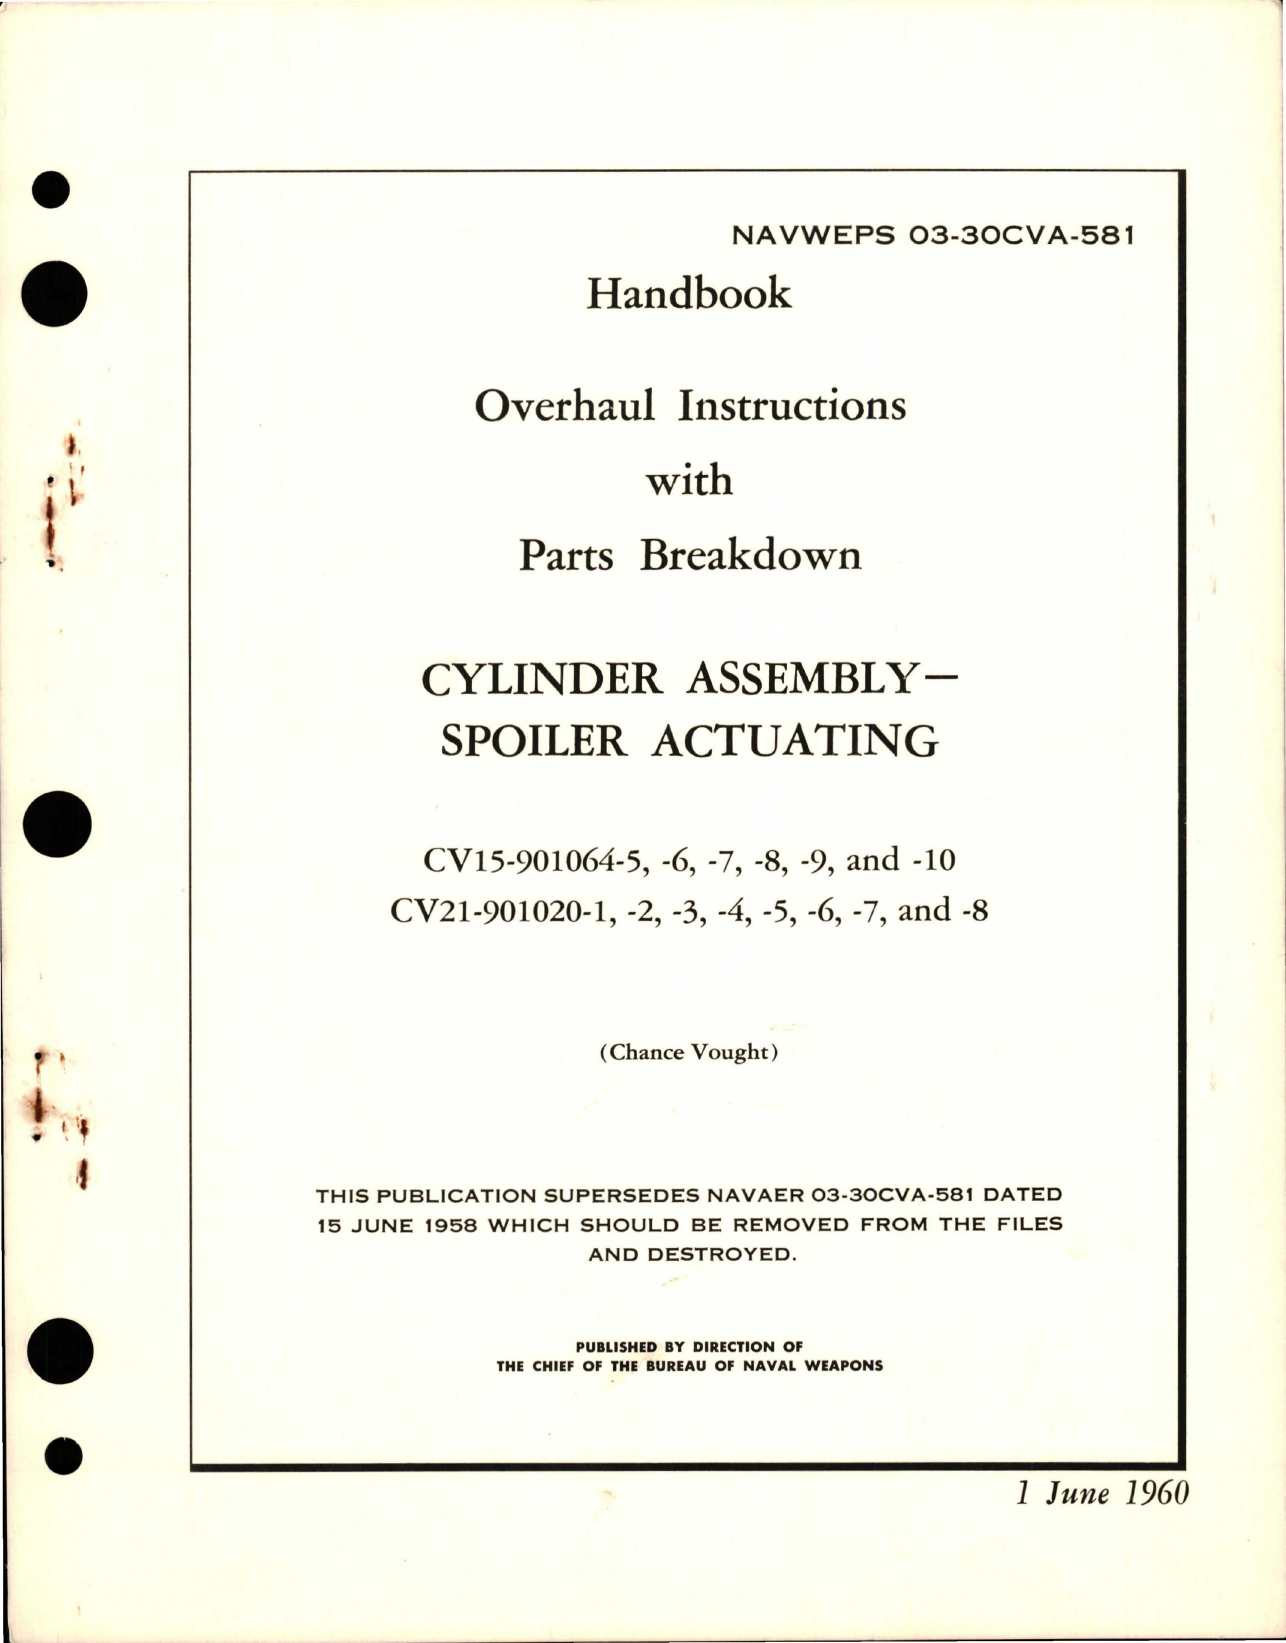 Sample page 1 from AirCorps Library document: Overhaul Instructions with Parts Breakdown for Spoiler Actuating Cylinder Assembly